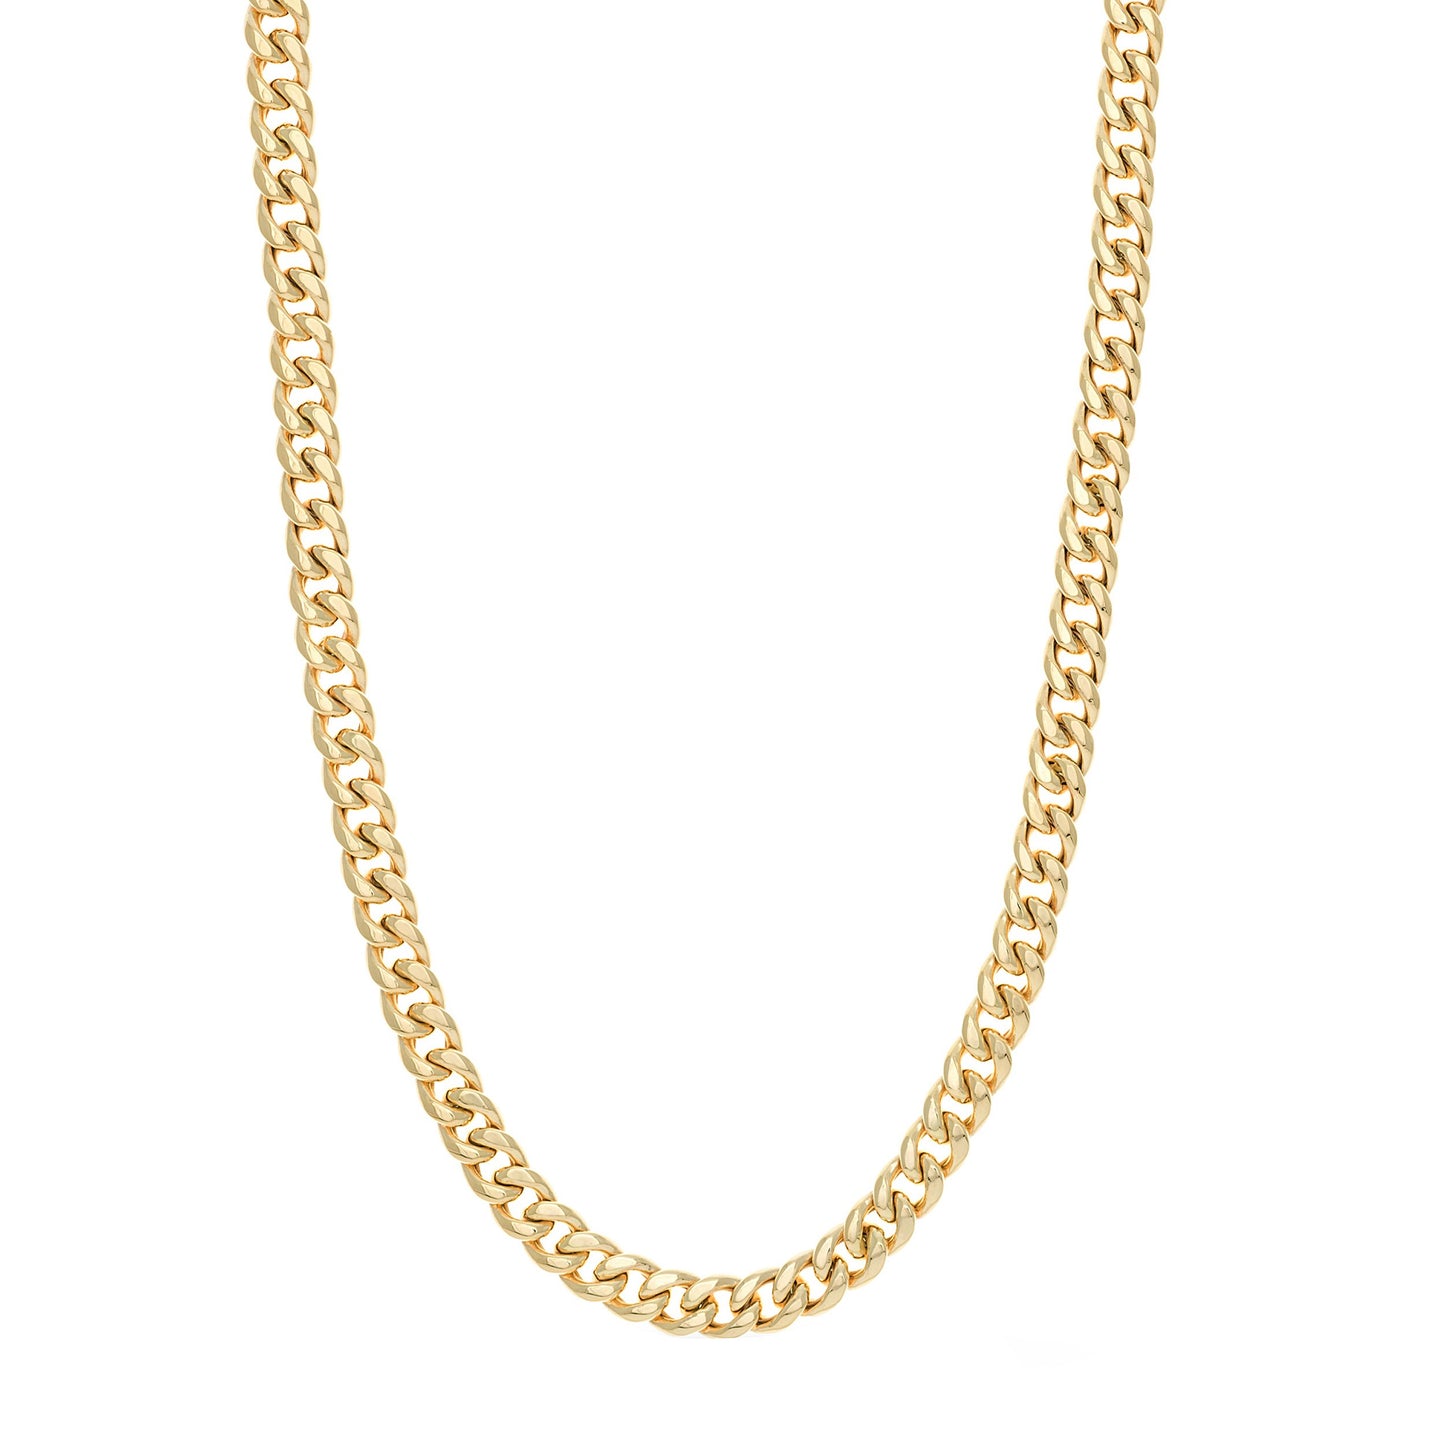 14k Gold Light Miami Cuban Chain Link Necklace, 24 and 26 Inch, 10.55 MM Width